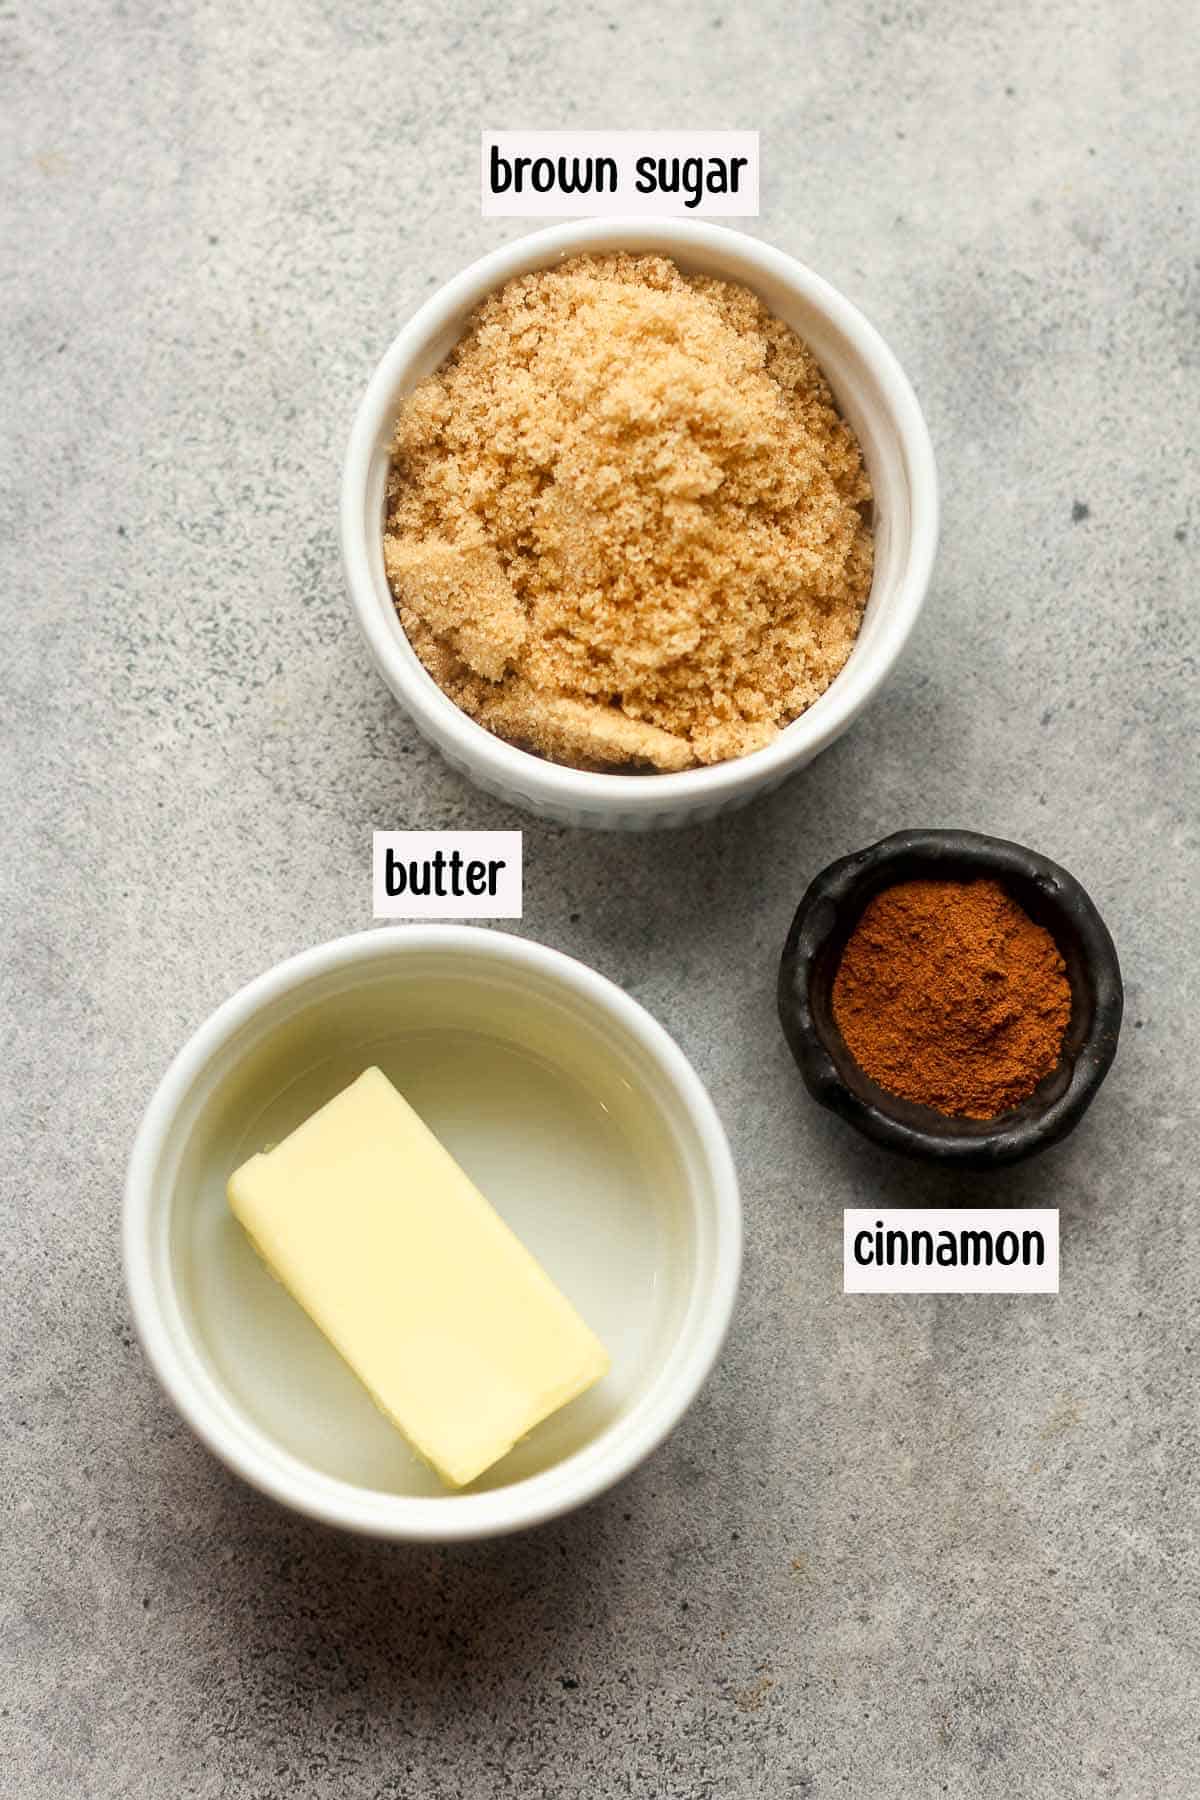 The filling ingredients, labeled.